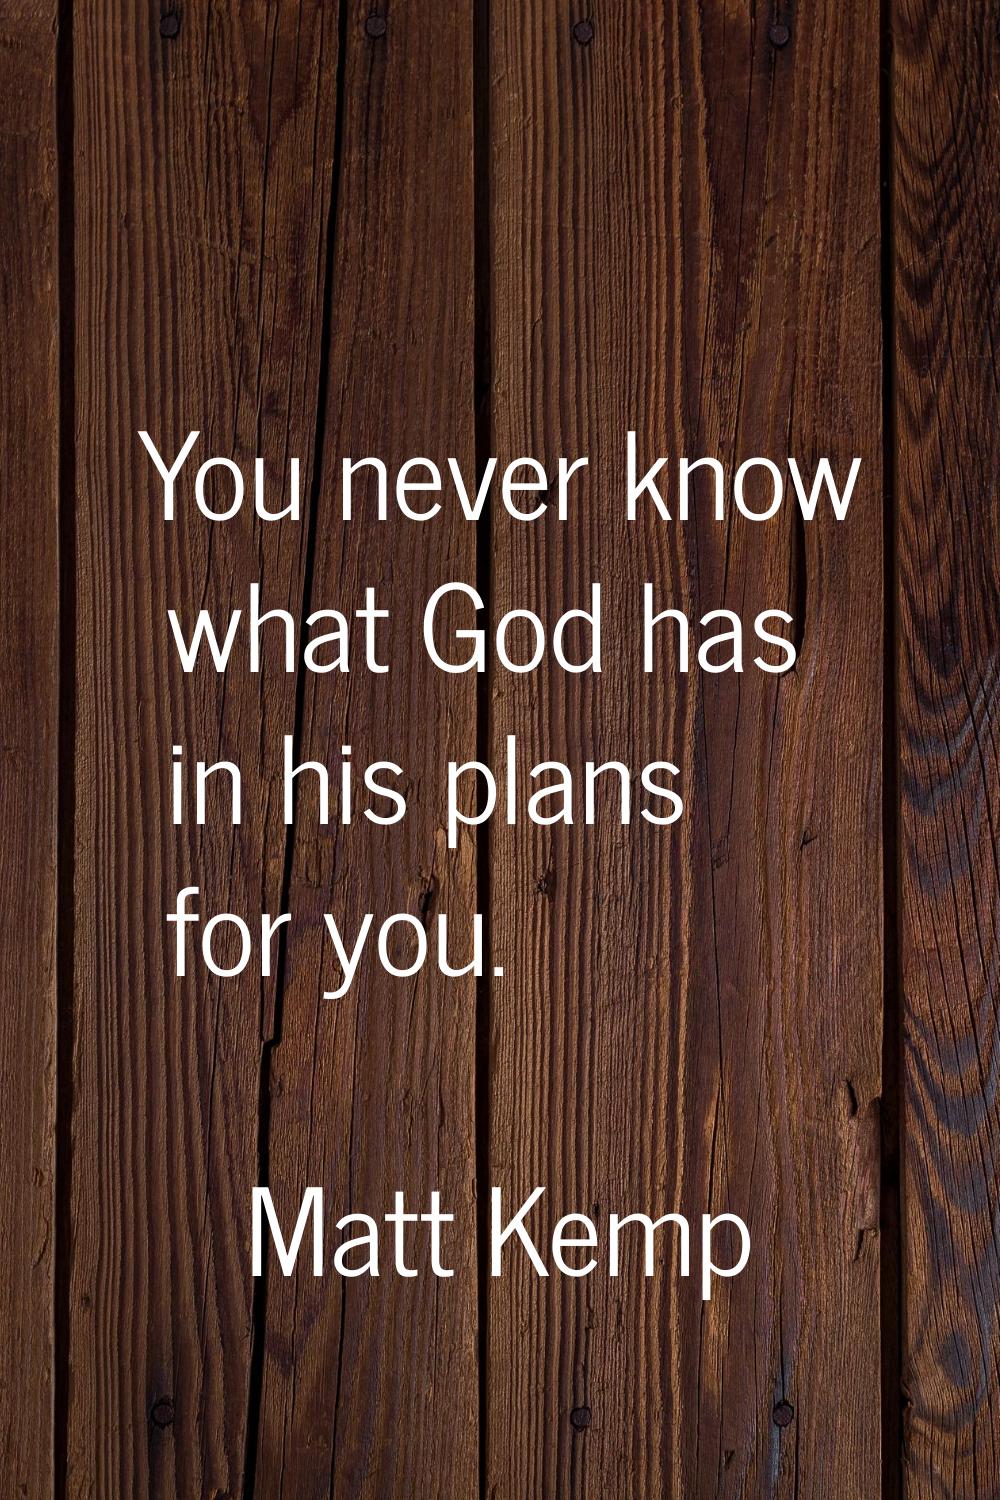 You never know what God has in his plans for you.